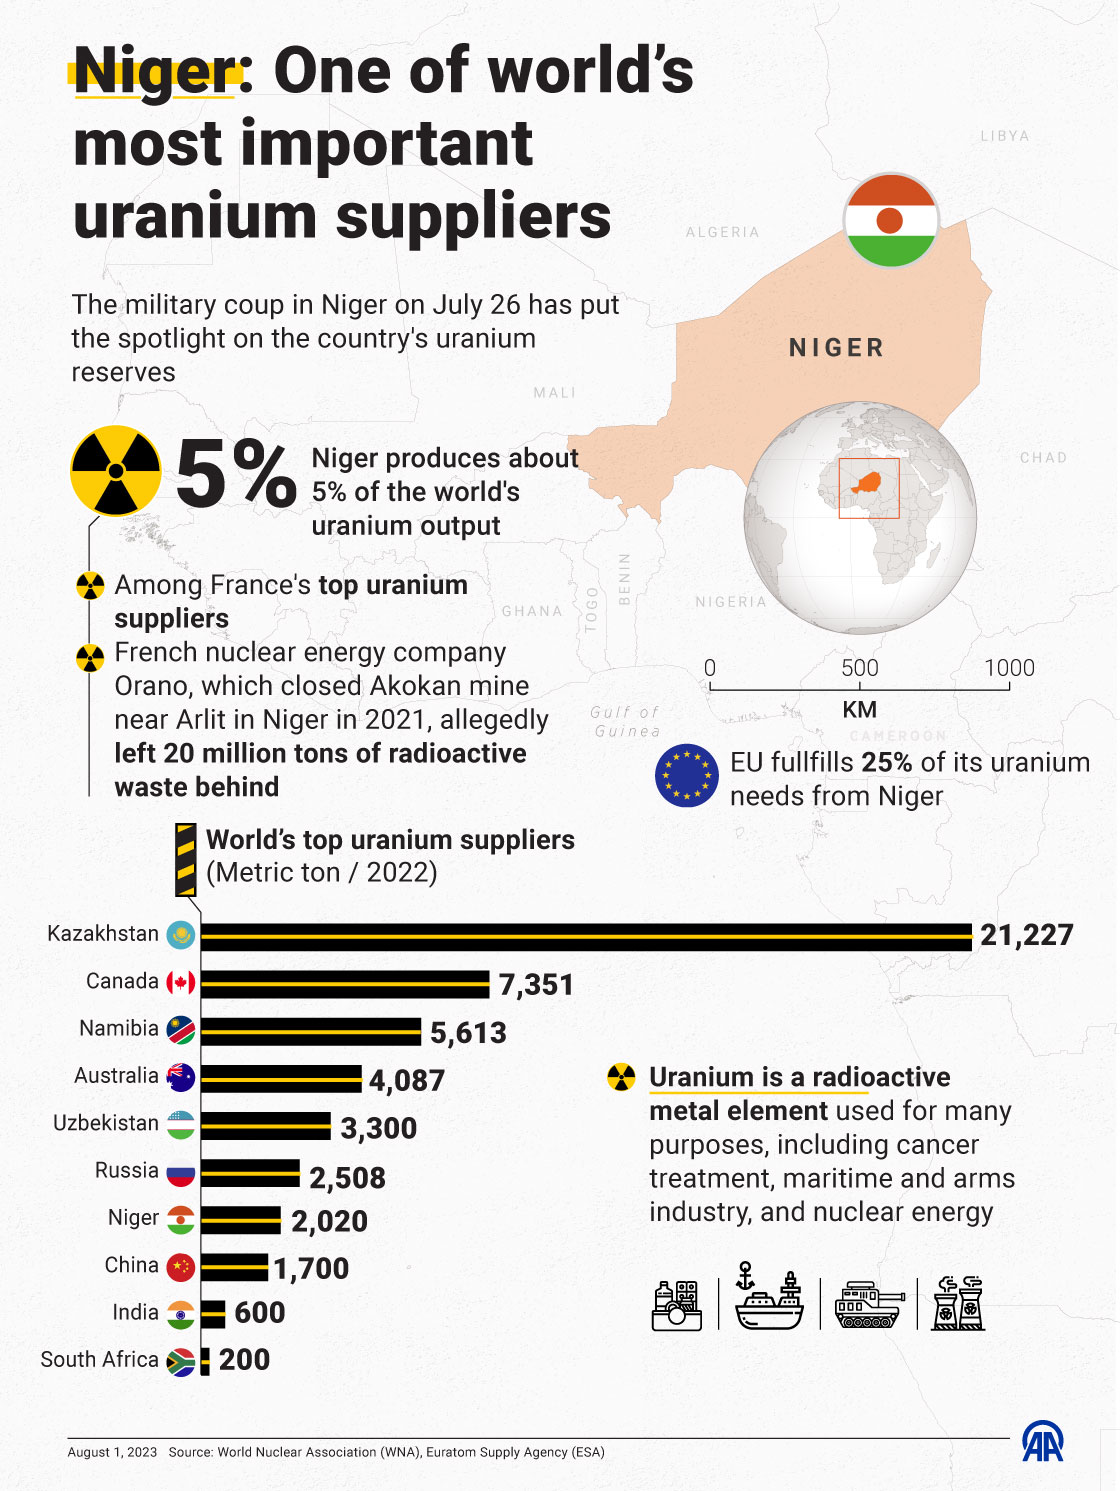 Niger: One of world’s most important uranium suppliers